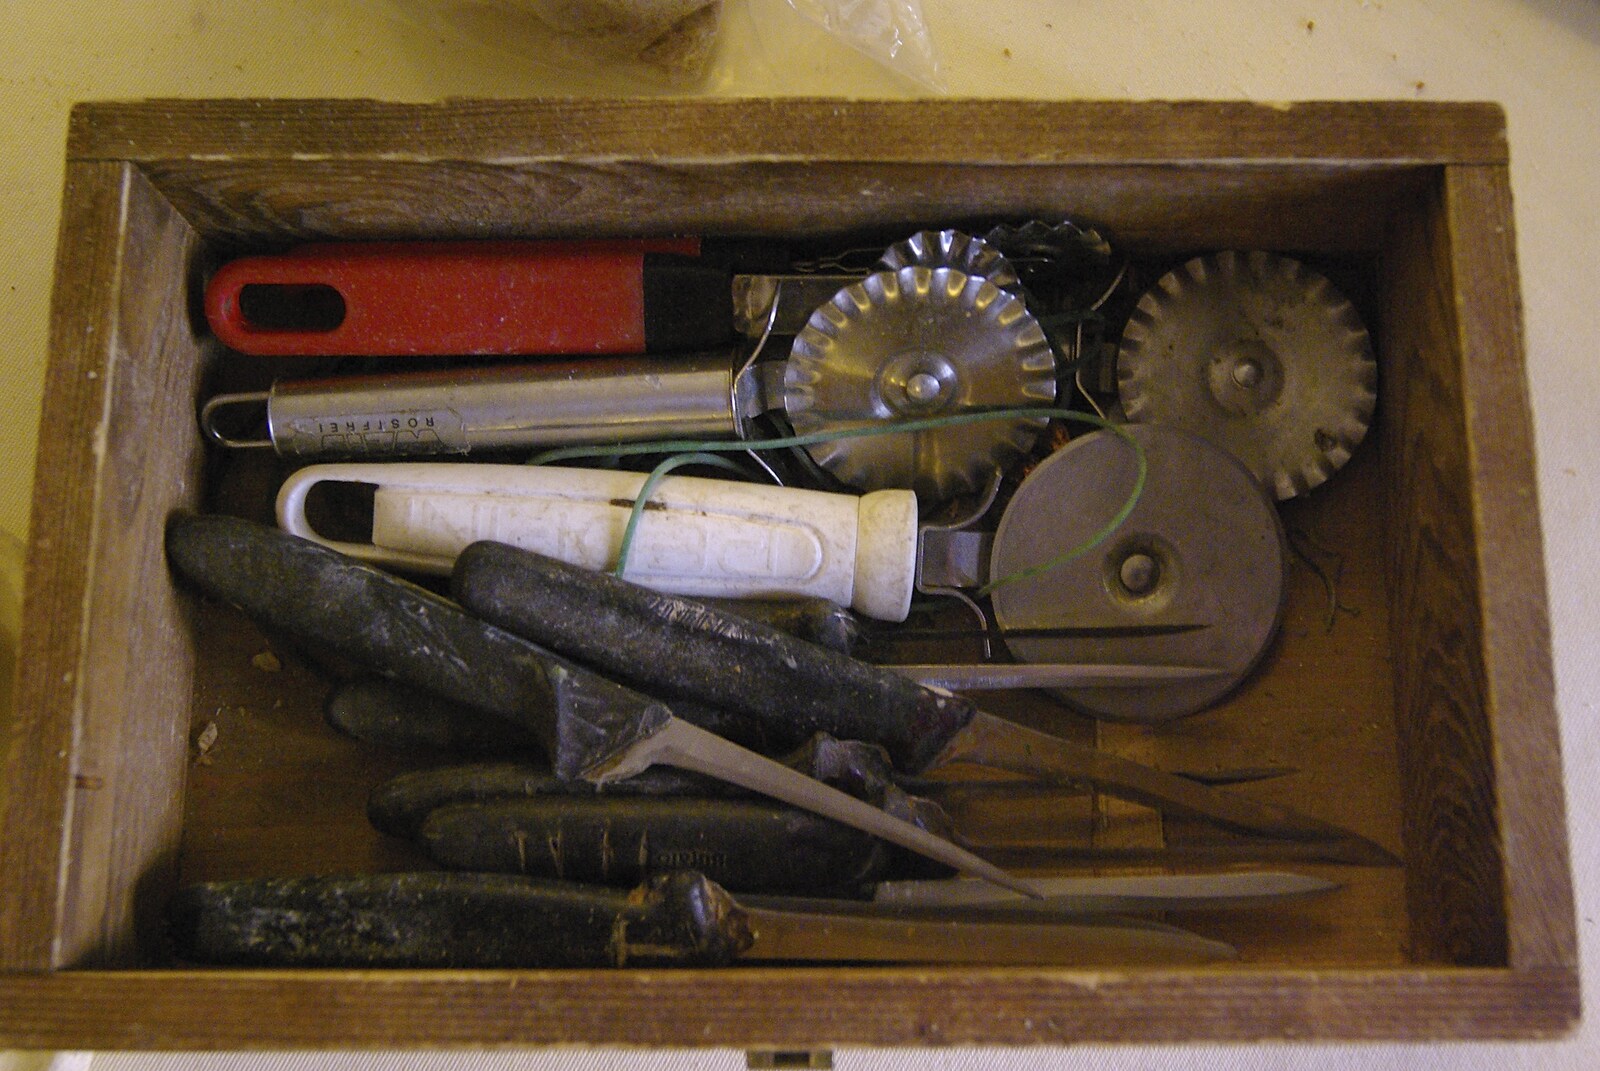 The Pastaio's toolbox from A Sojourn in The Eternal City, Rome, Italy - 22nd July 2008